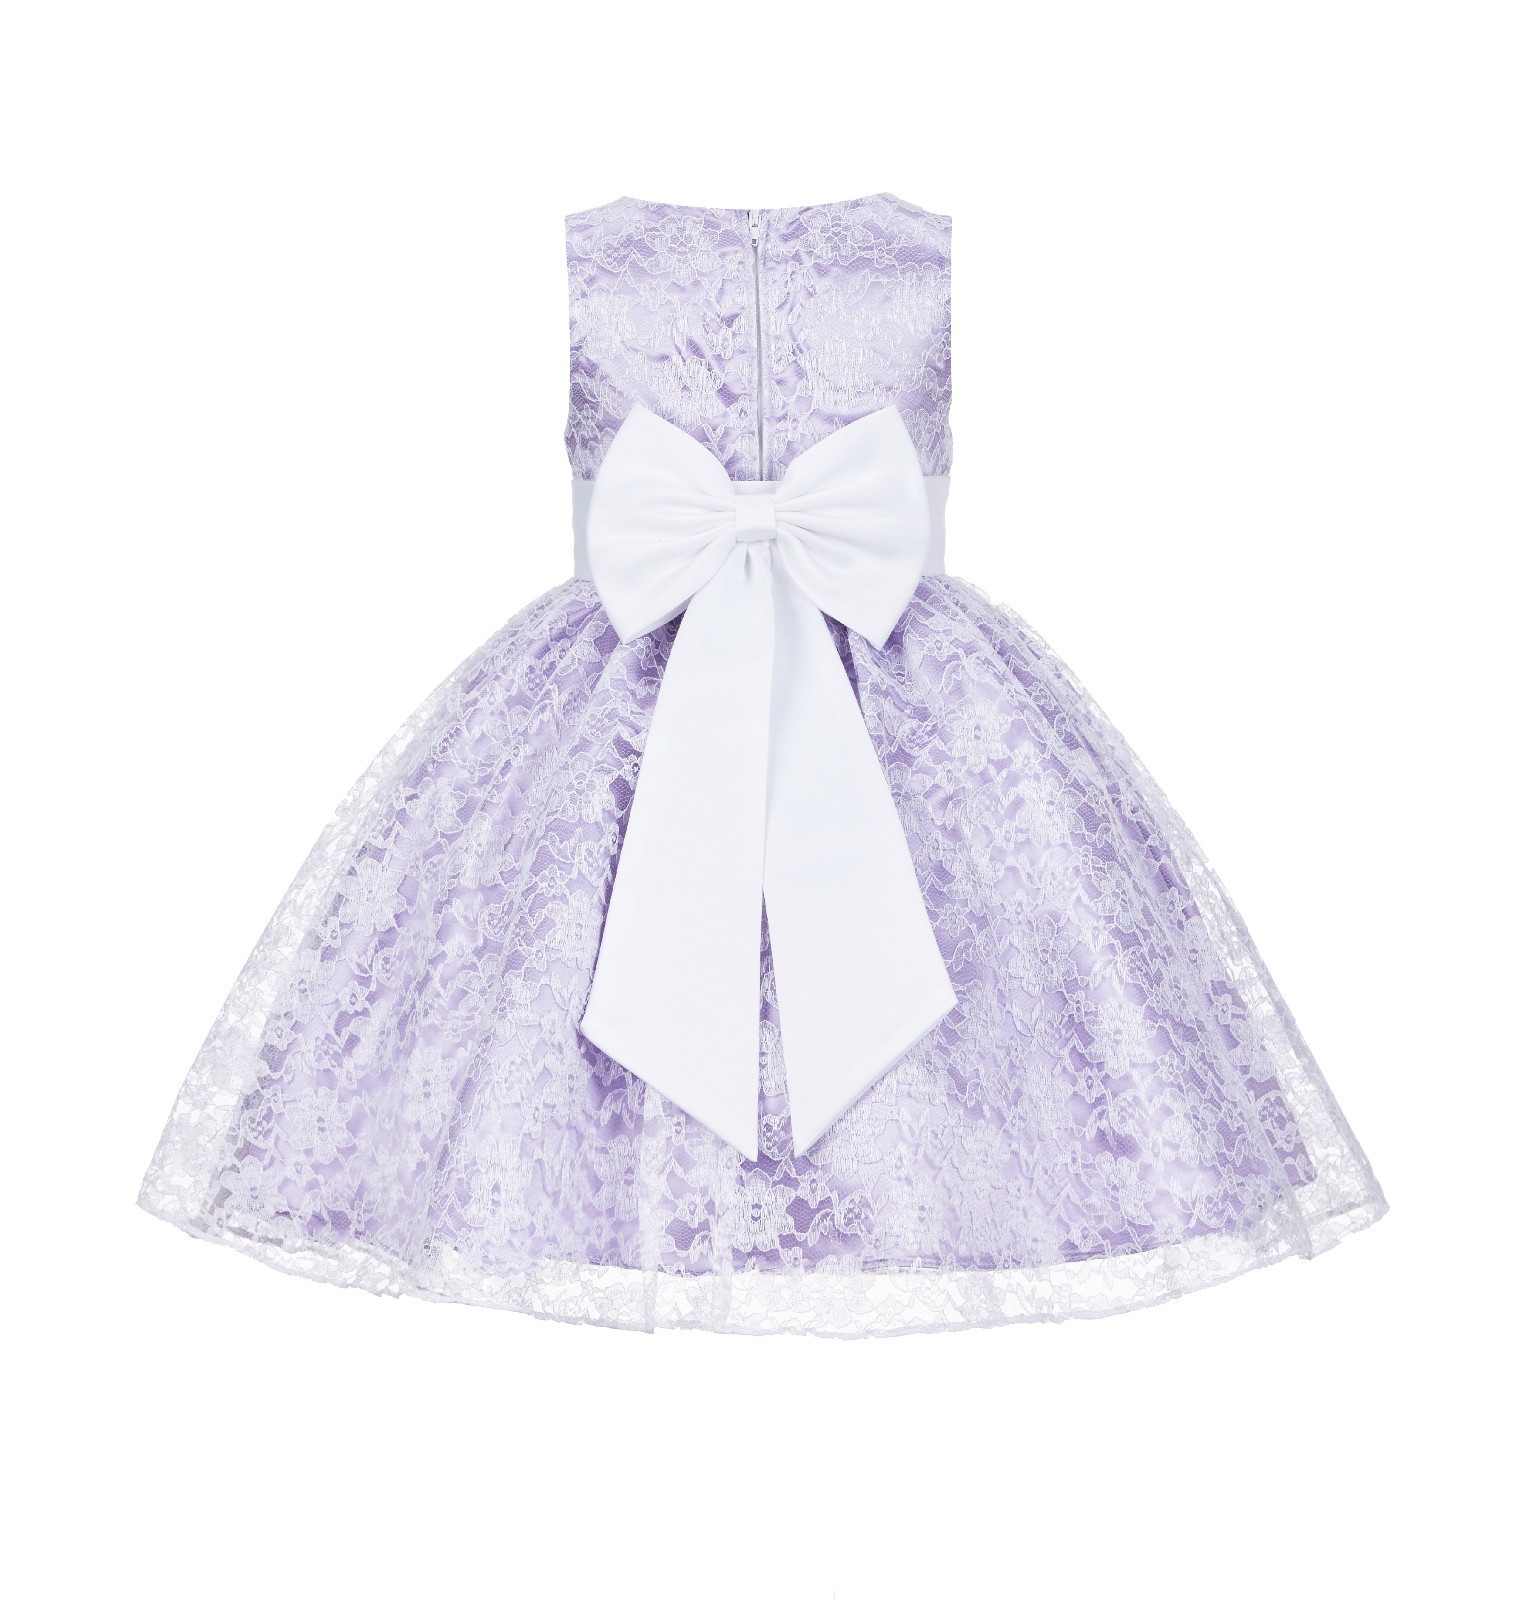 Lilac/White Floral Lace Overlay Flower Girl Dress Elegant Beauty 163T